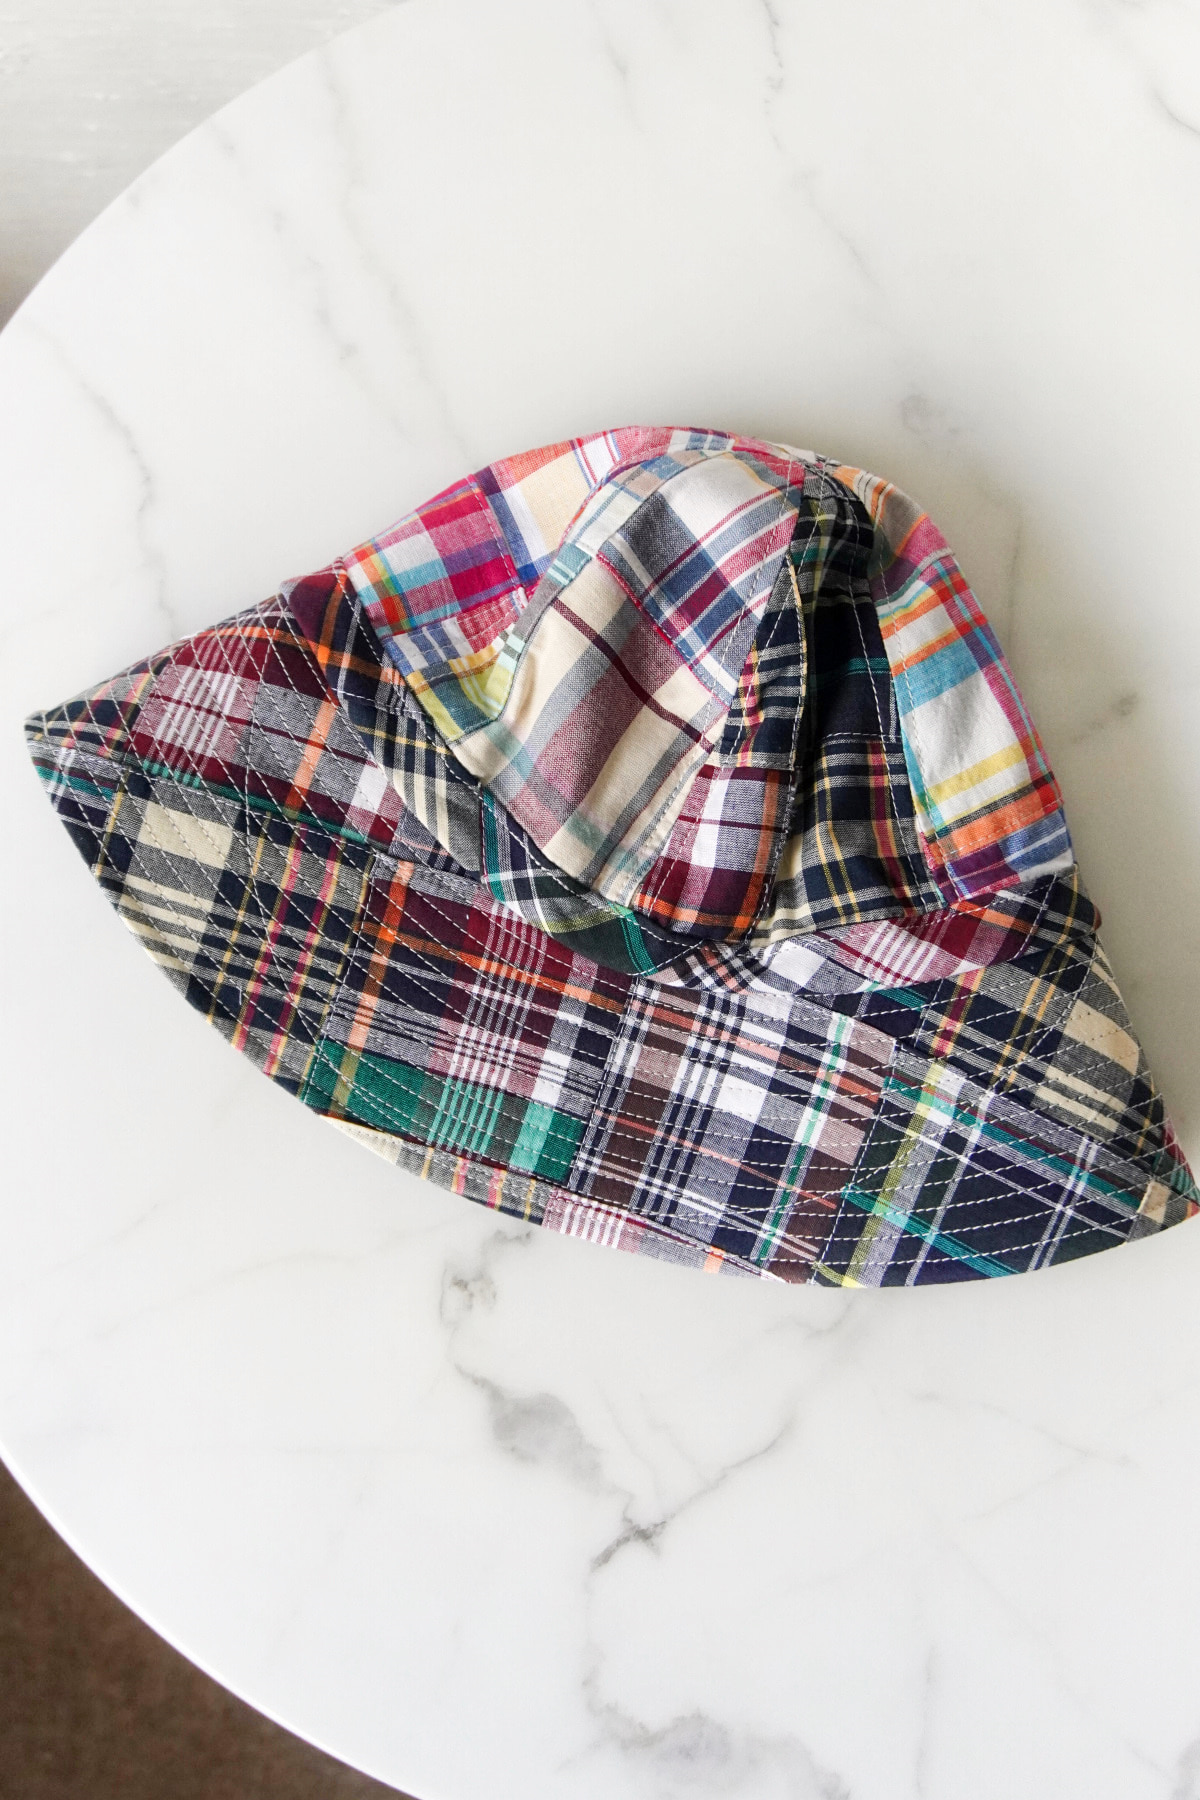 [KENNETH FIELD]  Guide Hat - Patch Madras Check Assorted